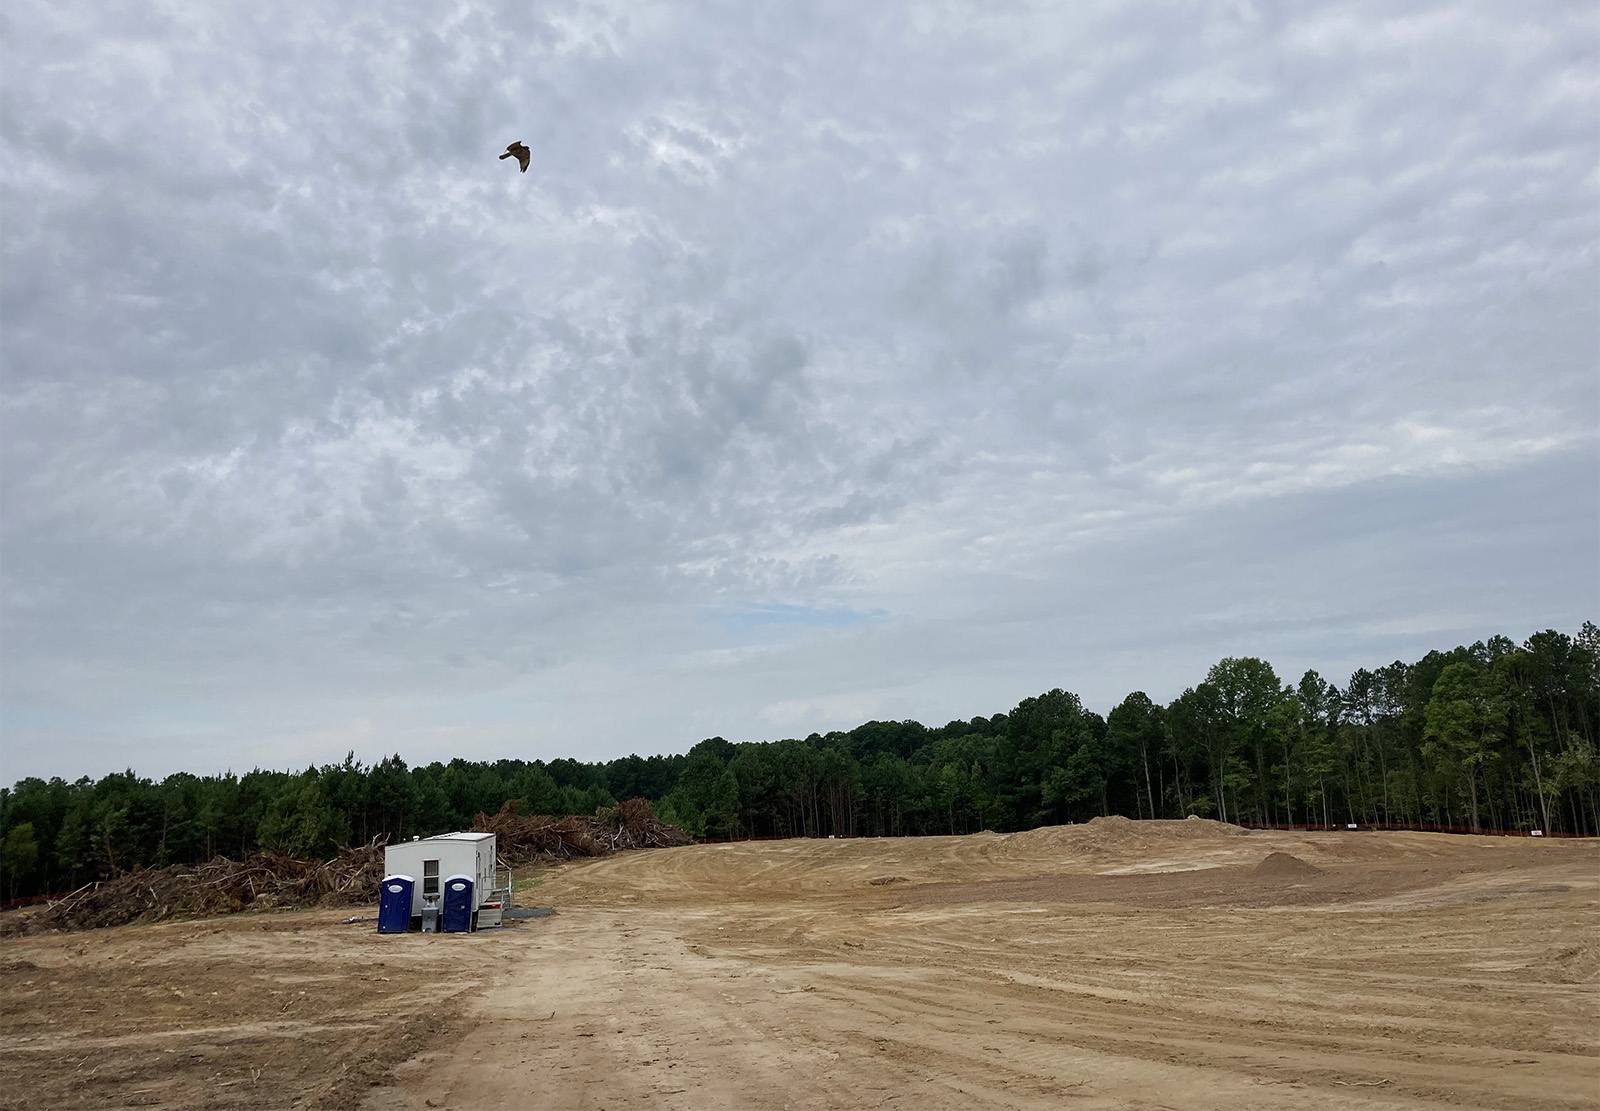 Construction has begun on the the new location for Mother Teresa Catholic Church in Cary, North Carolina. RNS photo by Yonat Shimron